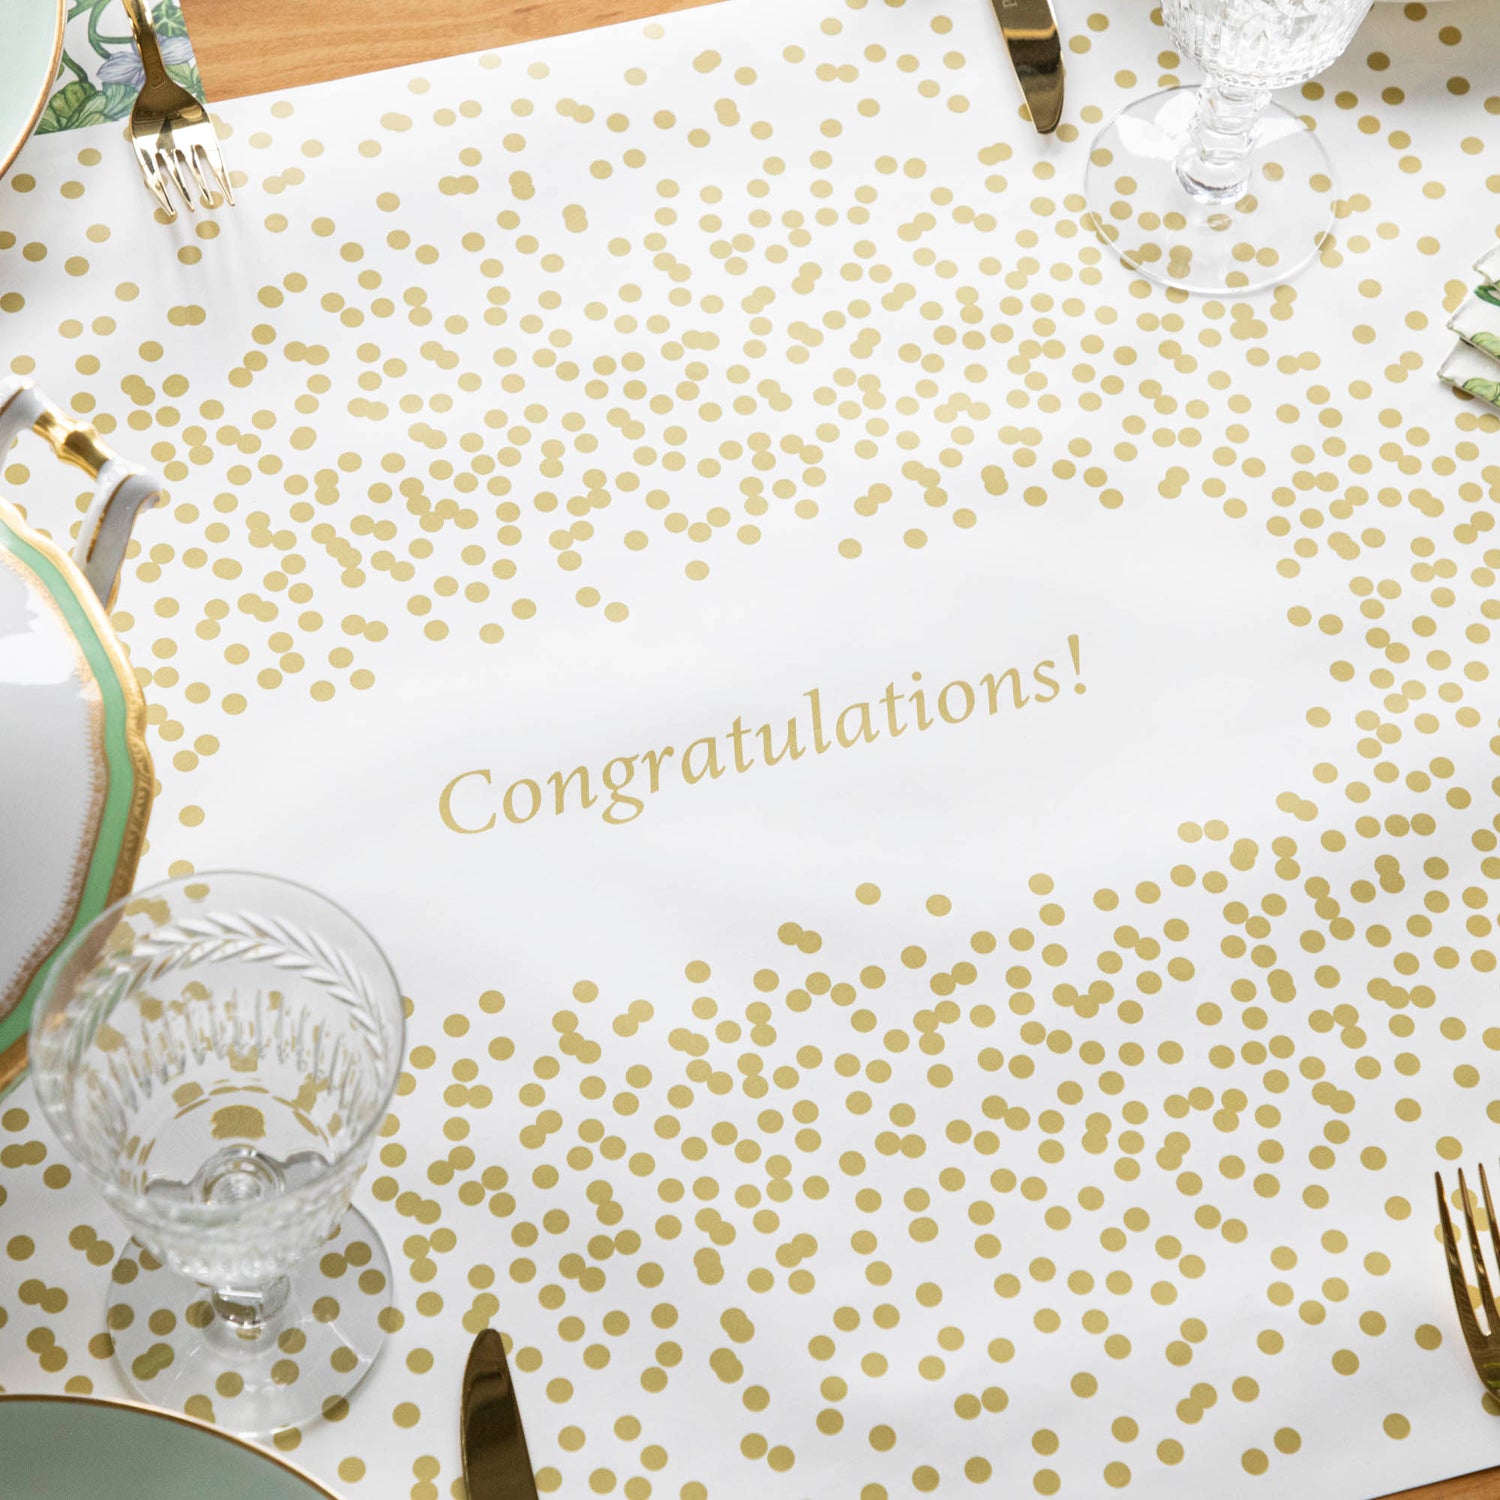 A white paper runner with gold confetti dots scattered around the perimeter, with an open area in the middle for a personalized message.